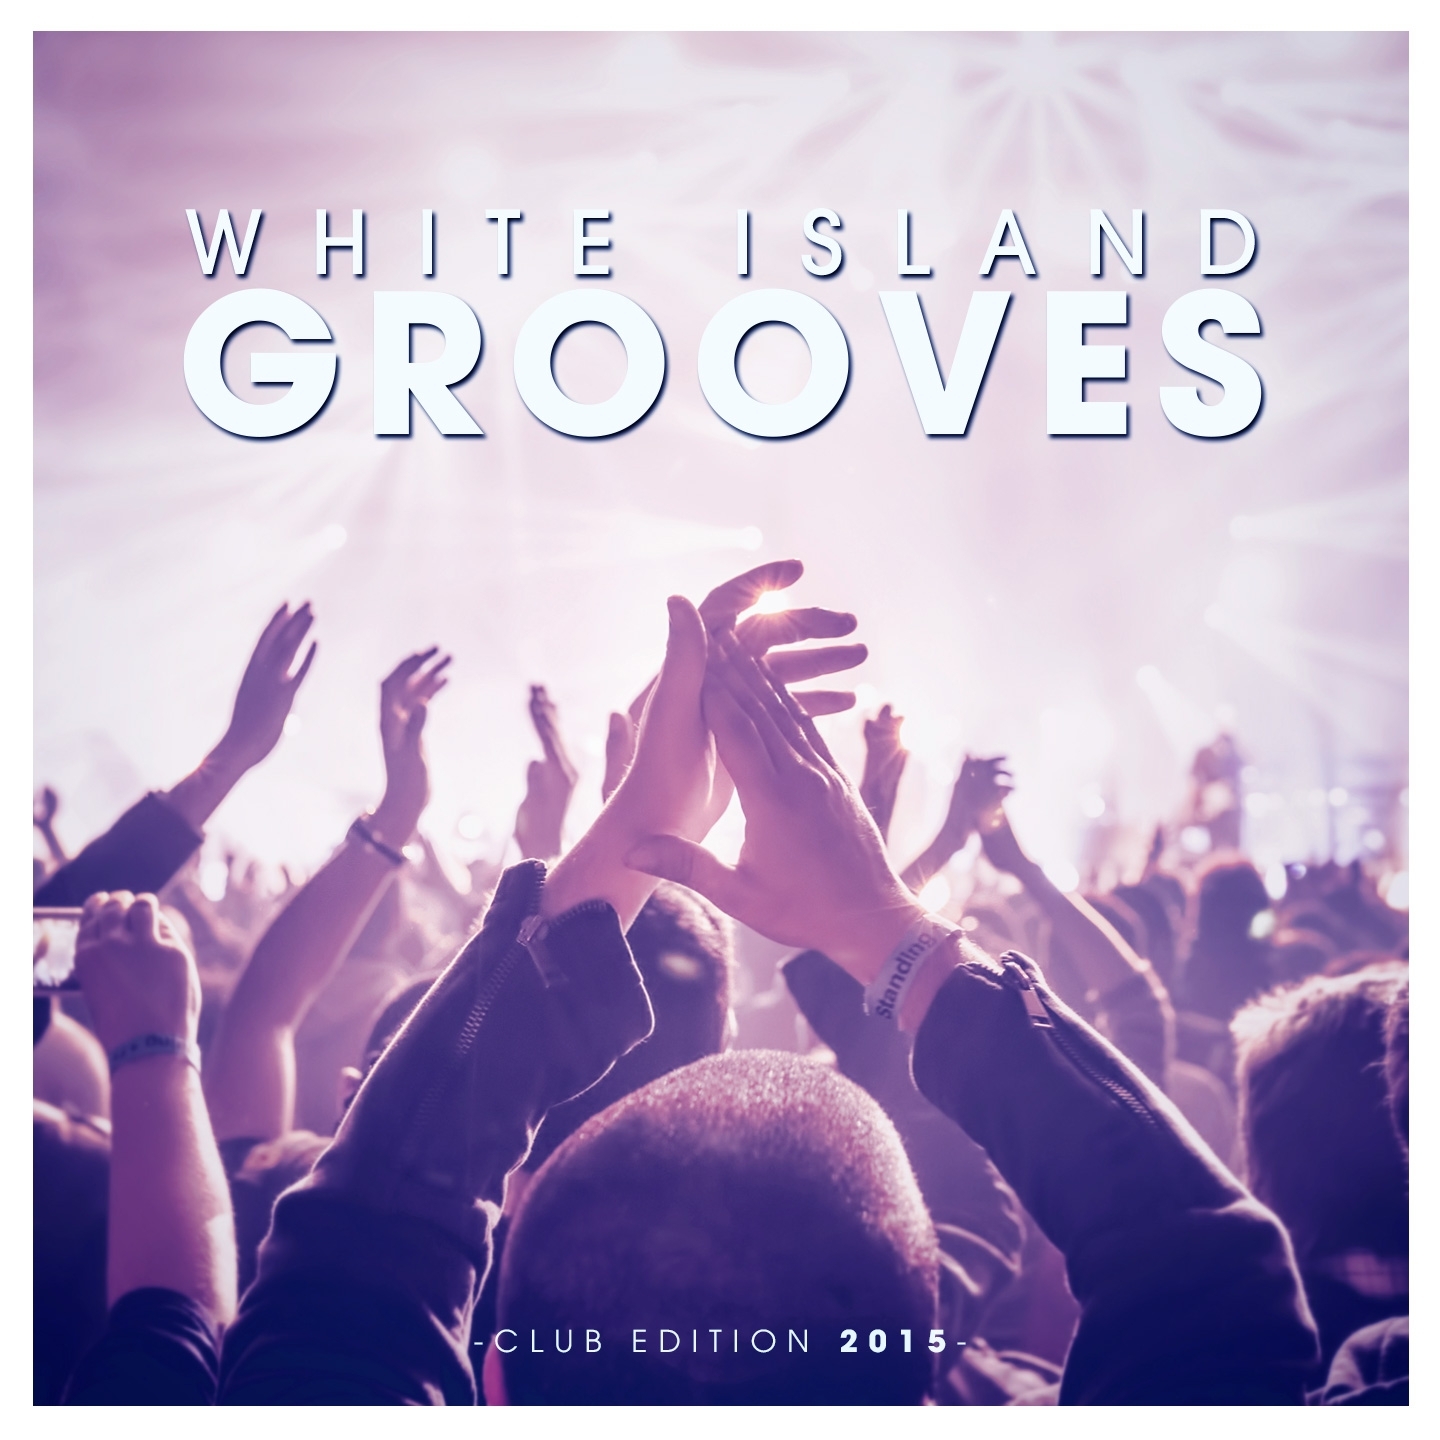 White Island Grooves - Club Edition 2015